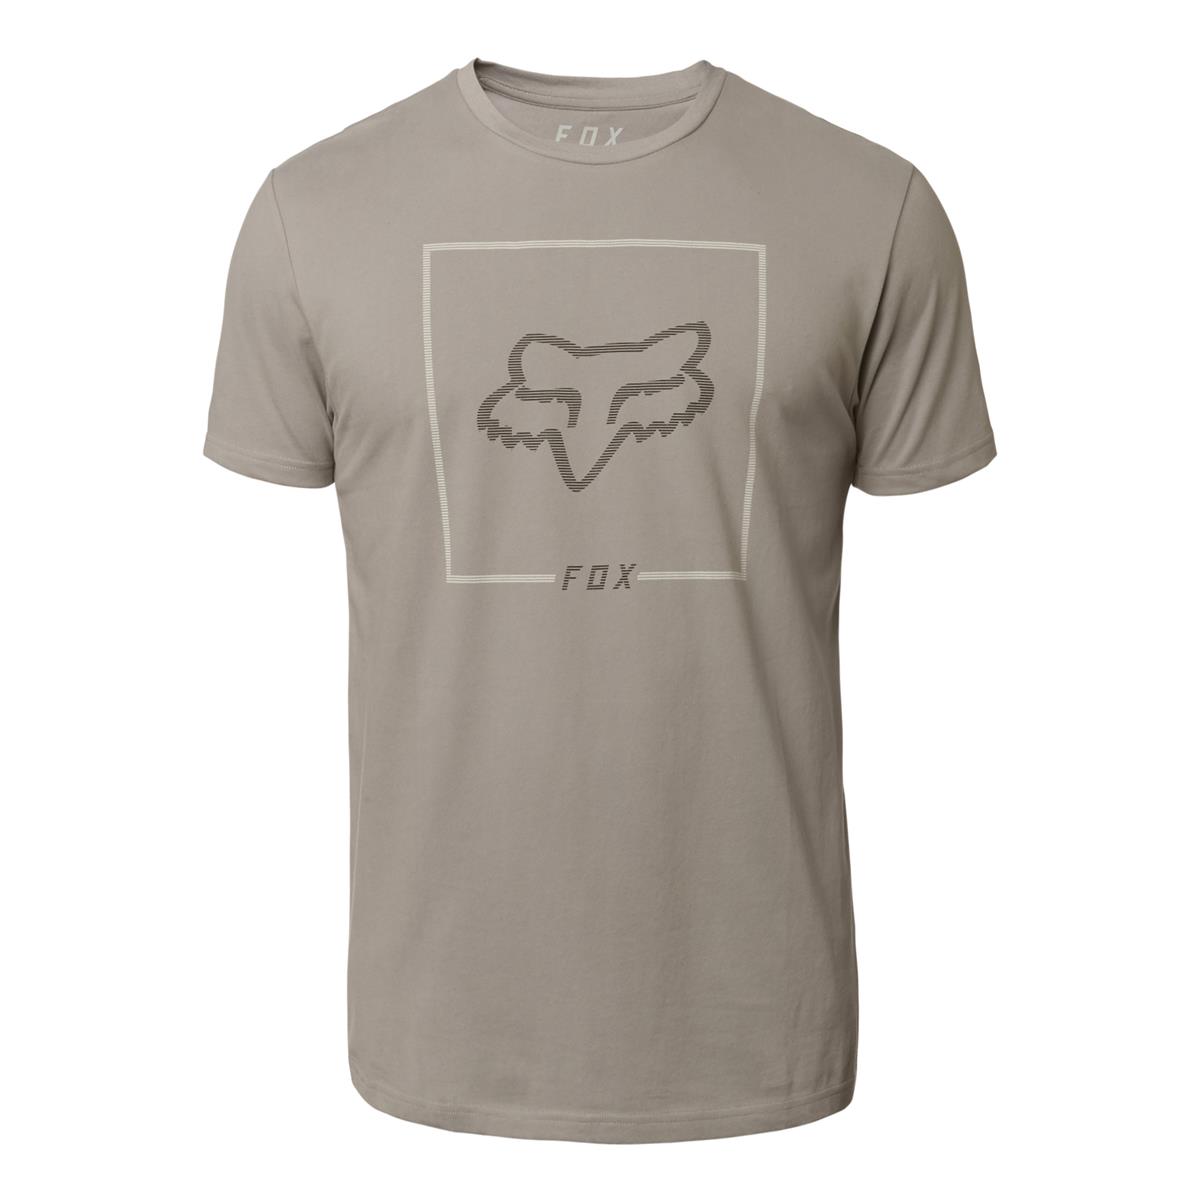 Fox T-Shirt Chapped Airline Steel Grey